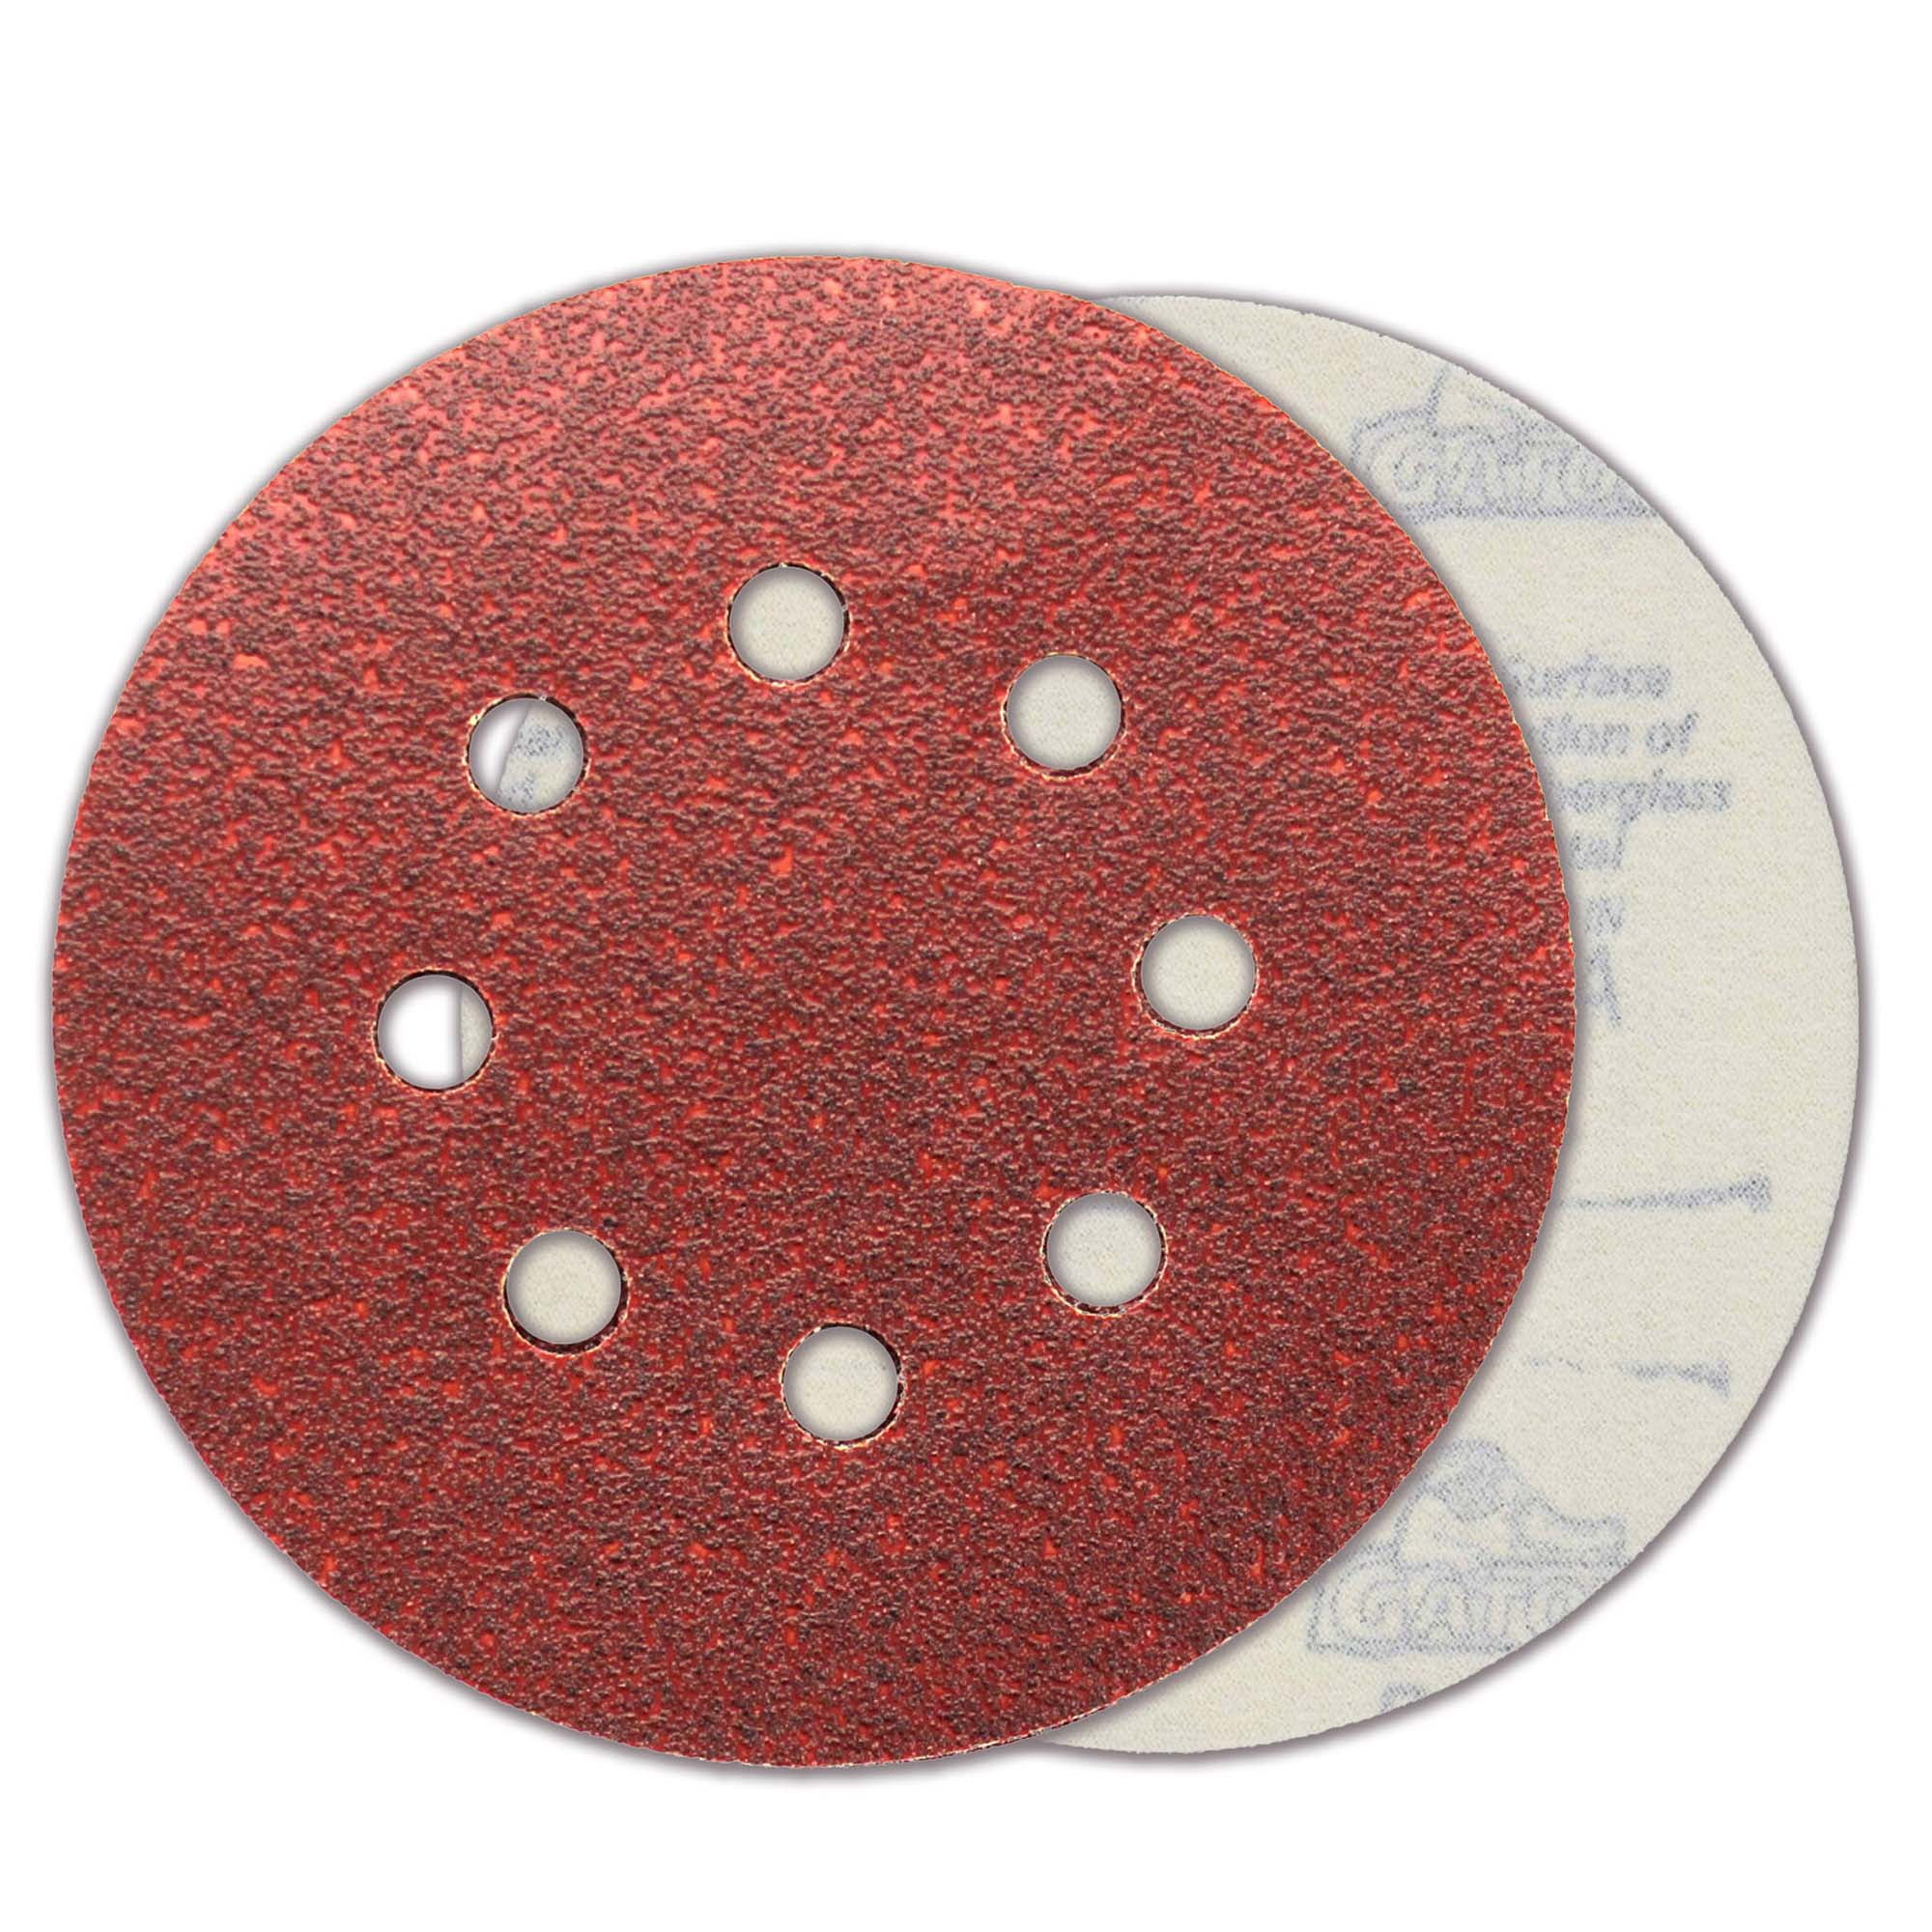 5-Inch 3-Pack Norton 03228 3X Hook and Sand 180 Grit Universal Vac Hole Sanding Disc